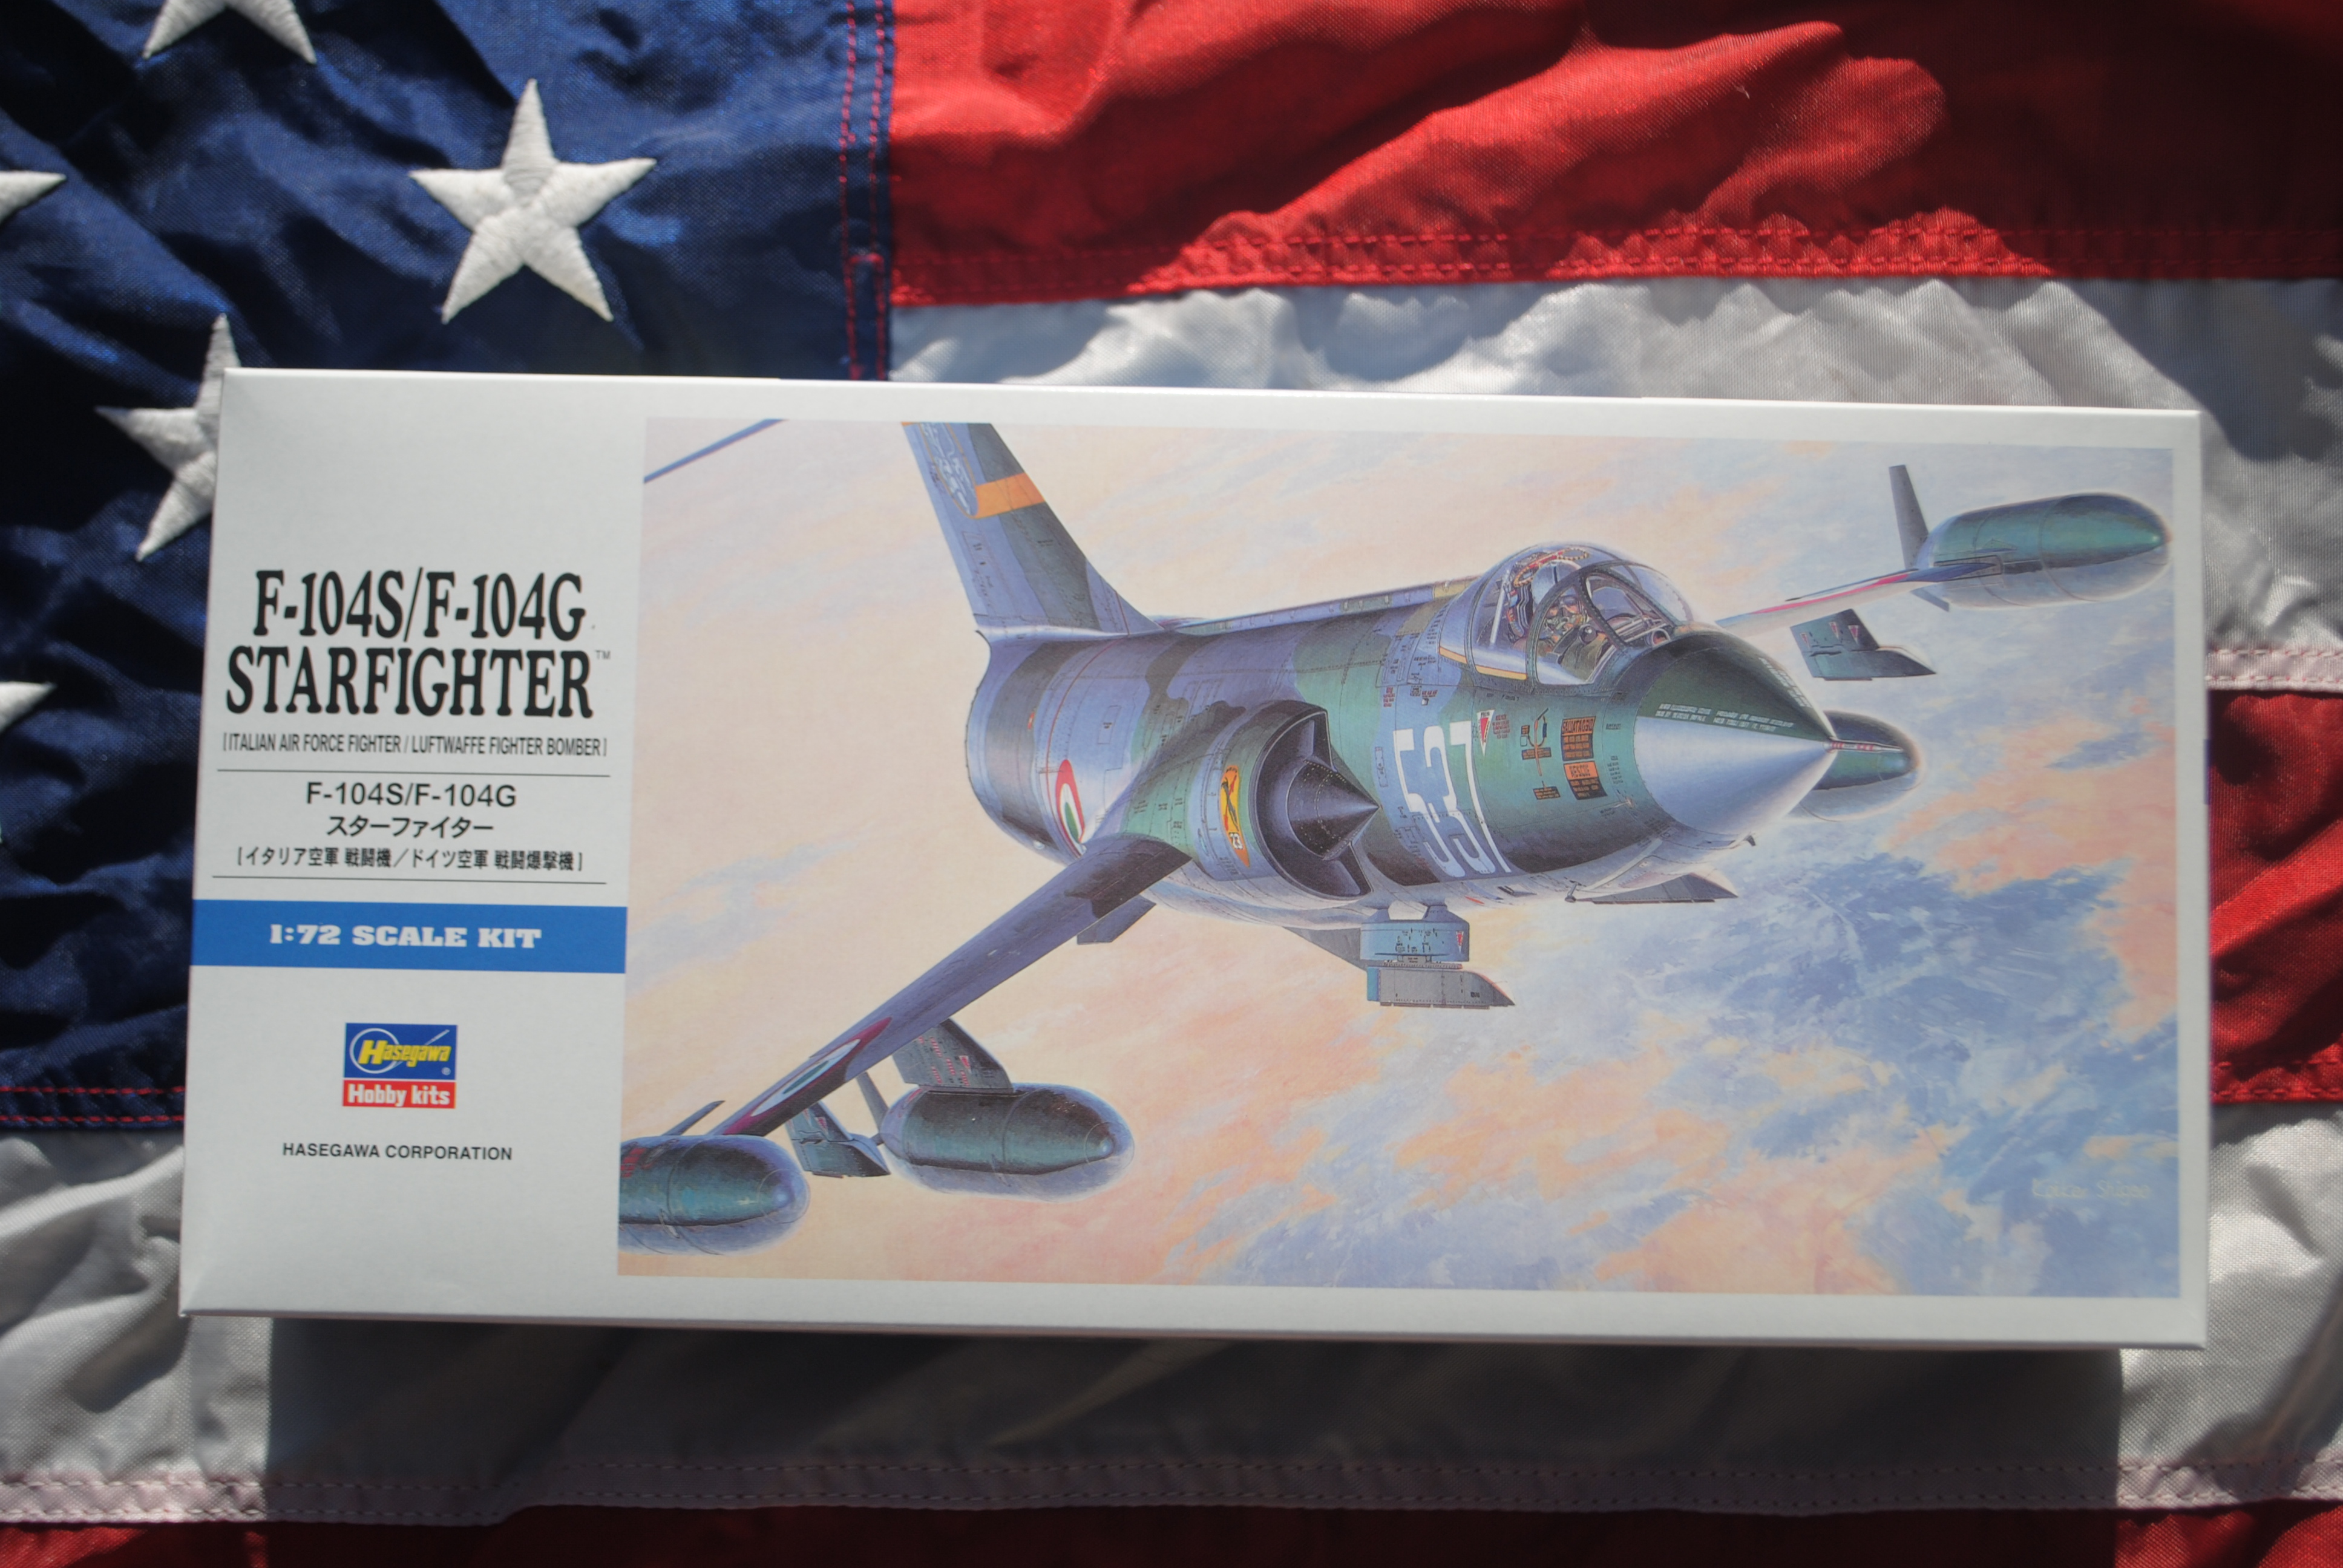 Hasegawa D17 / 00447 F-104S/F-104G Starfighter [Italian Air Force Fighter / Luftwaffe Fighter Bomber]